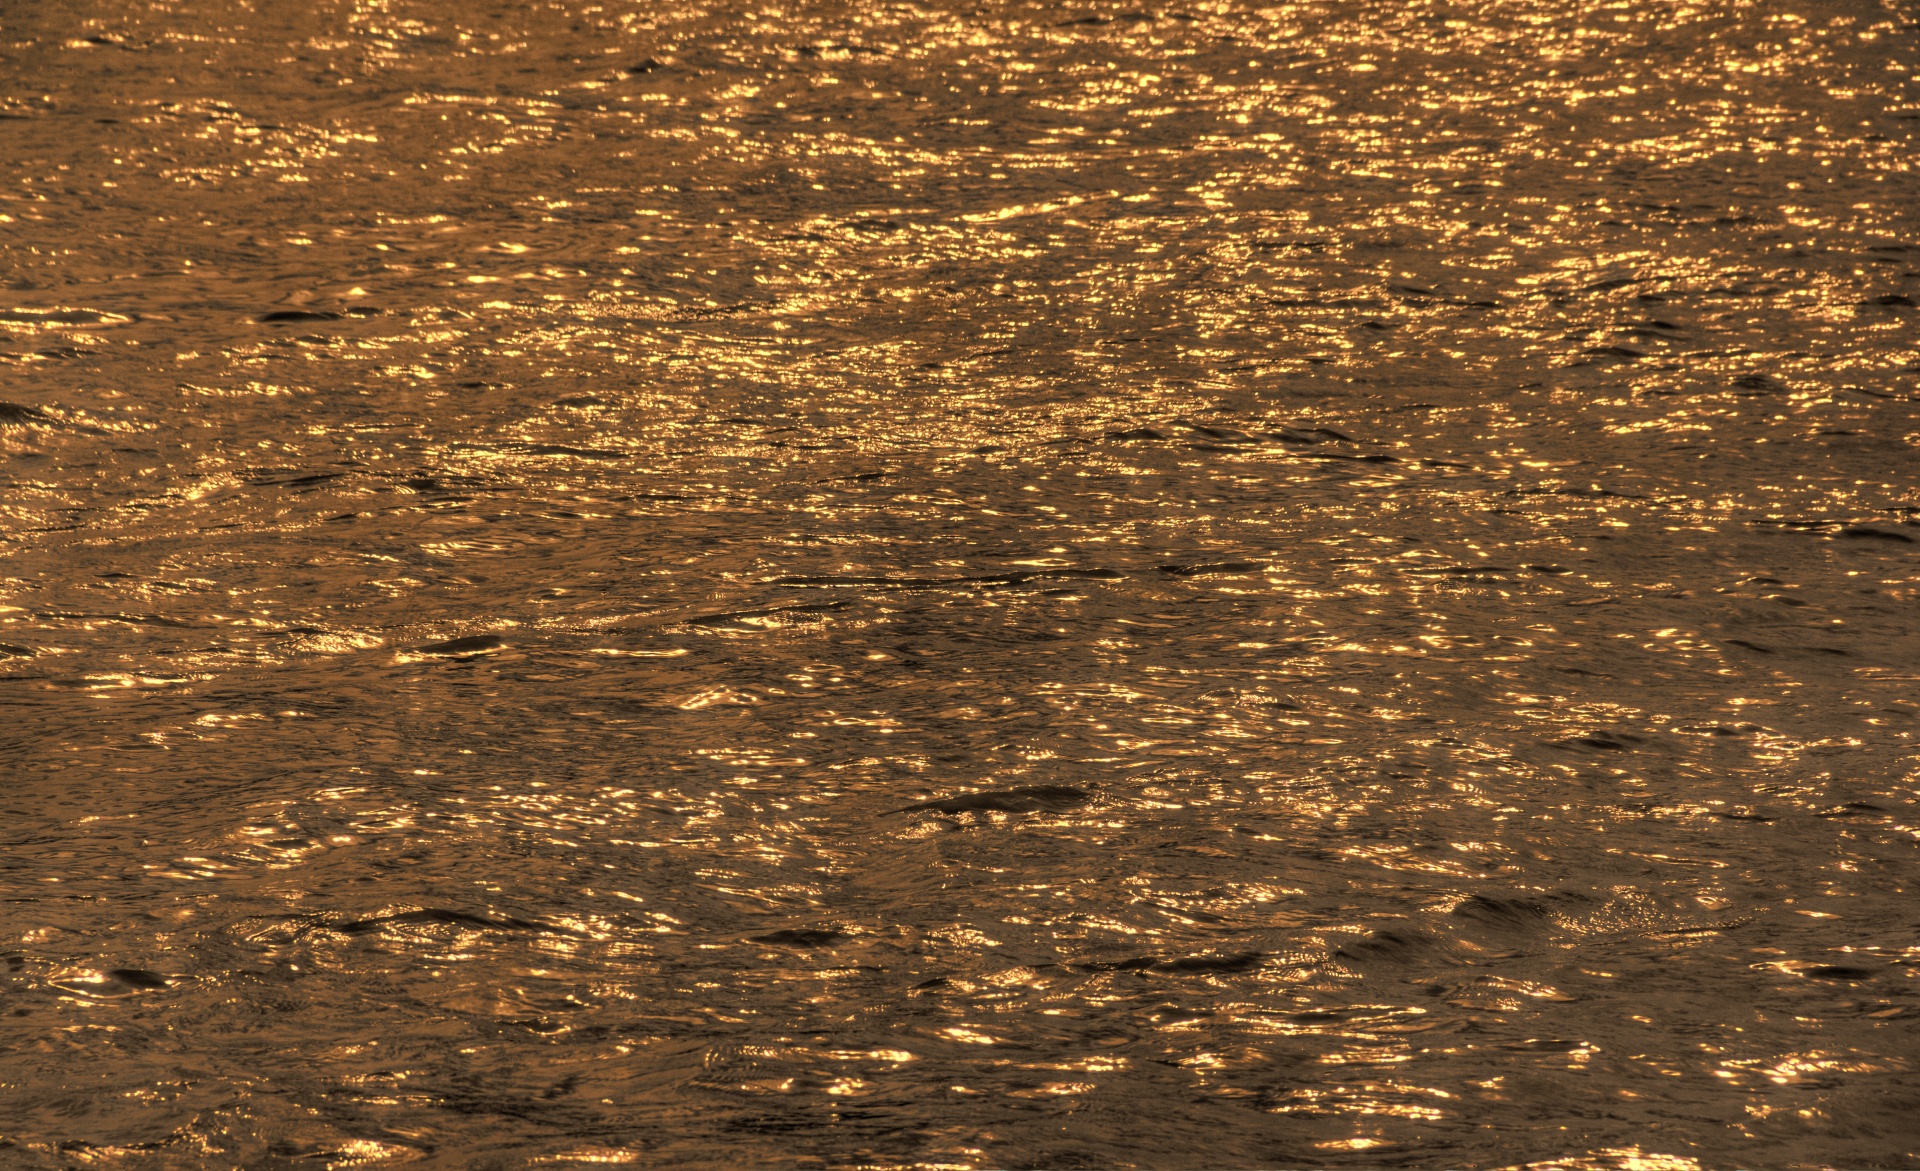 Gold Water